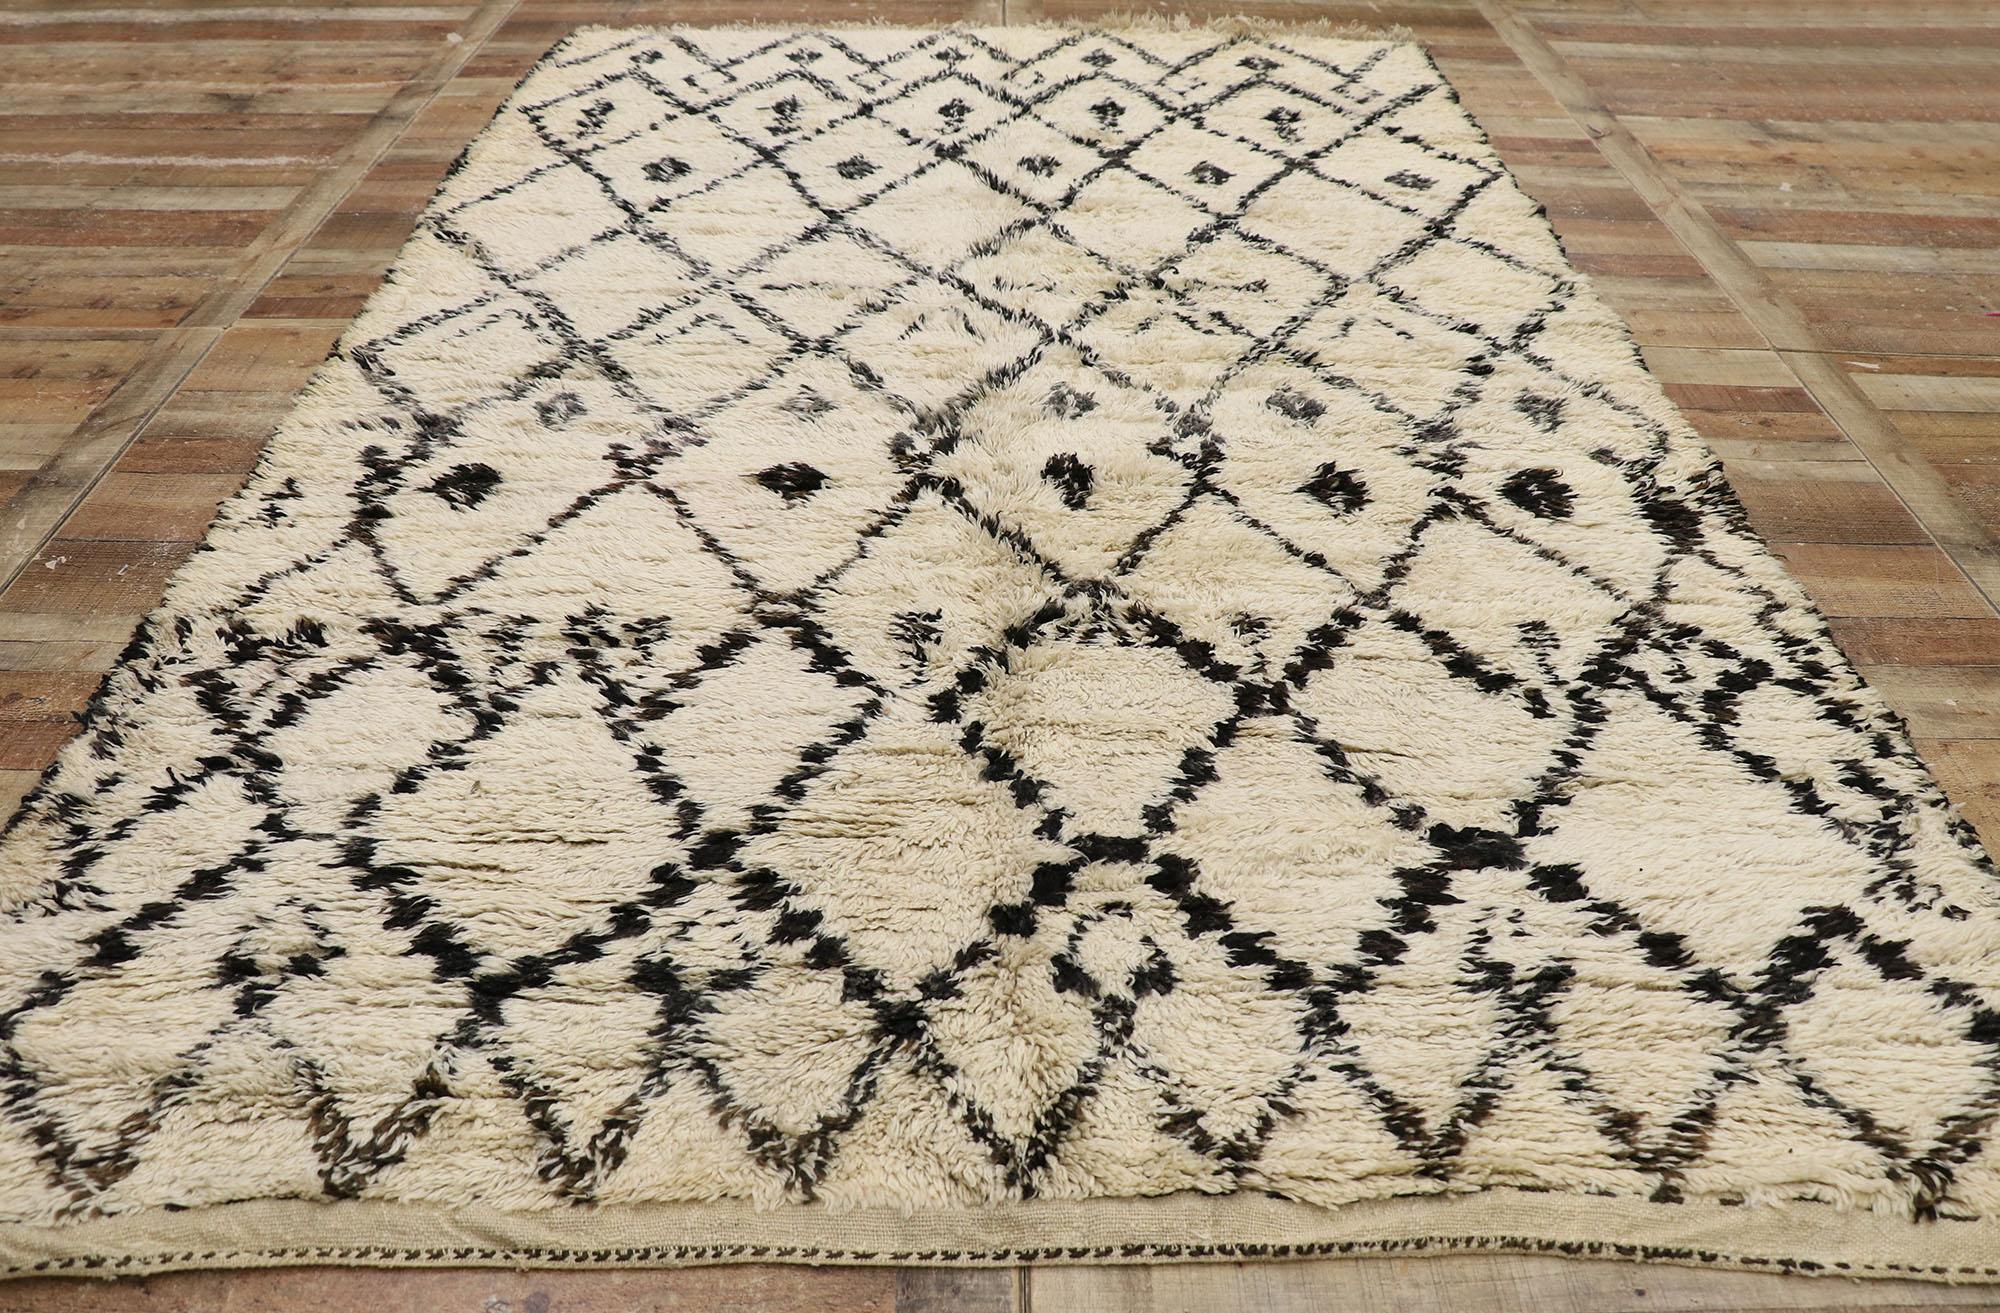 Vintage Berber Beni Ourain Moroccan Rug with Tribal Style 1